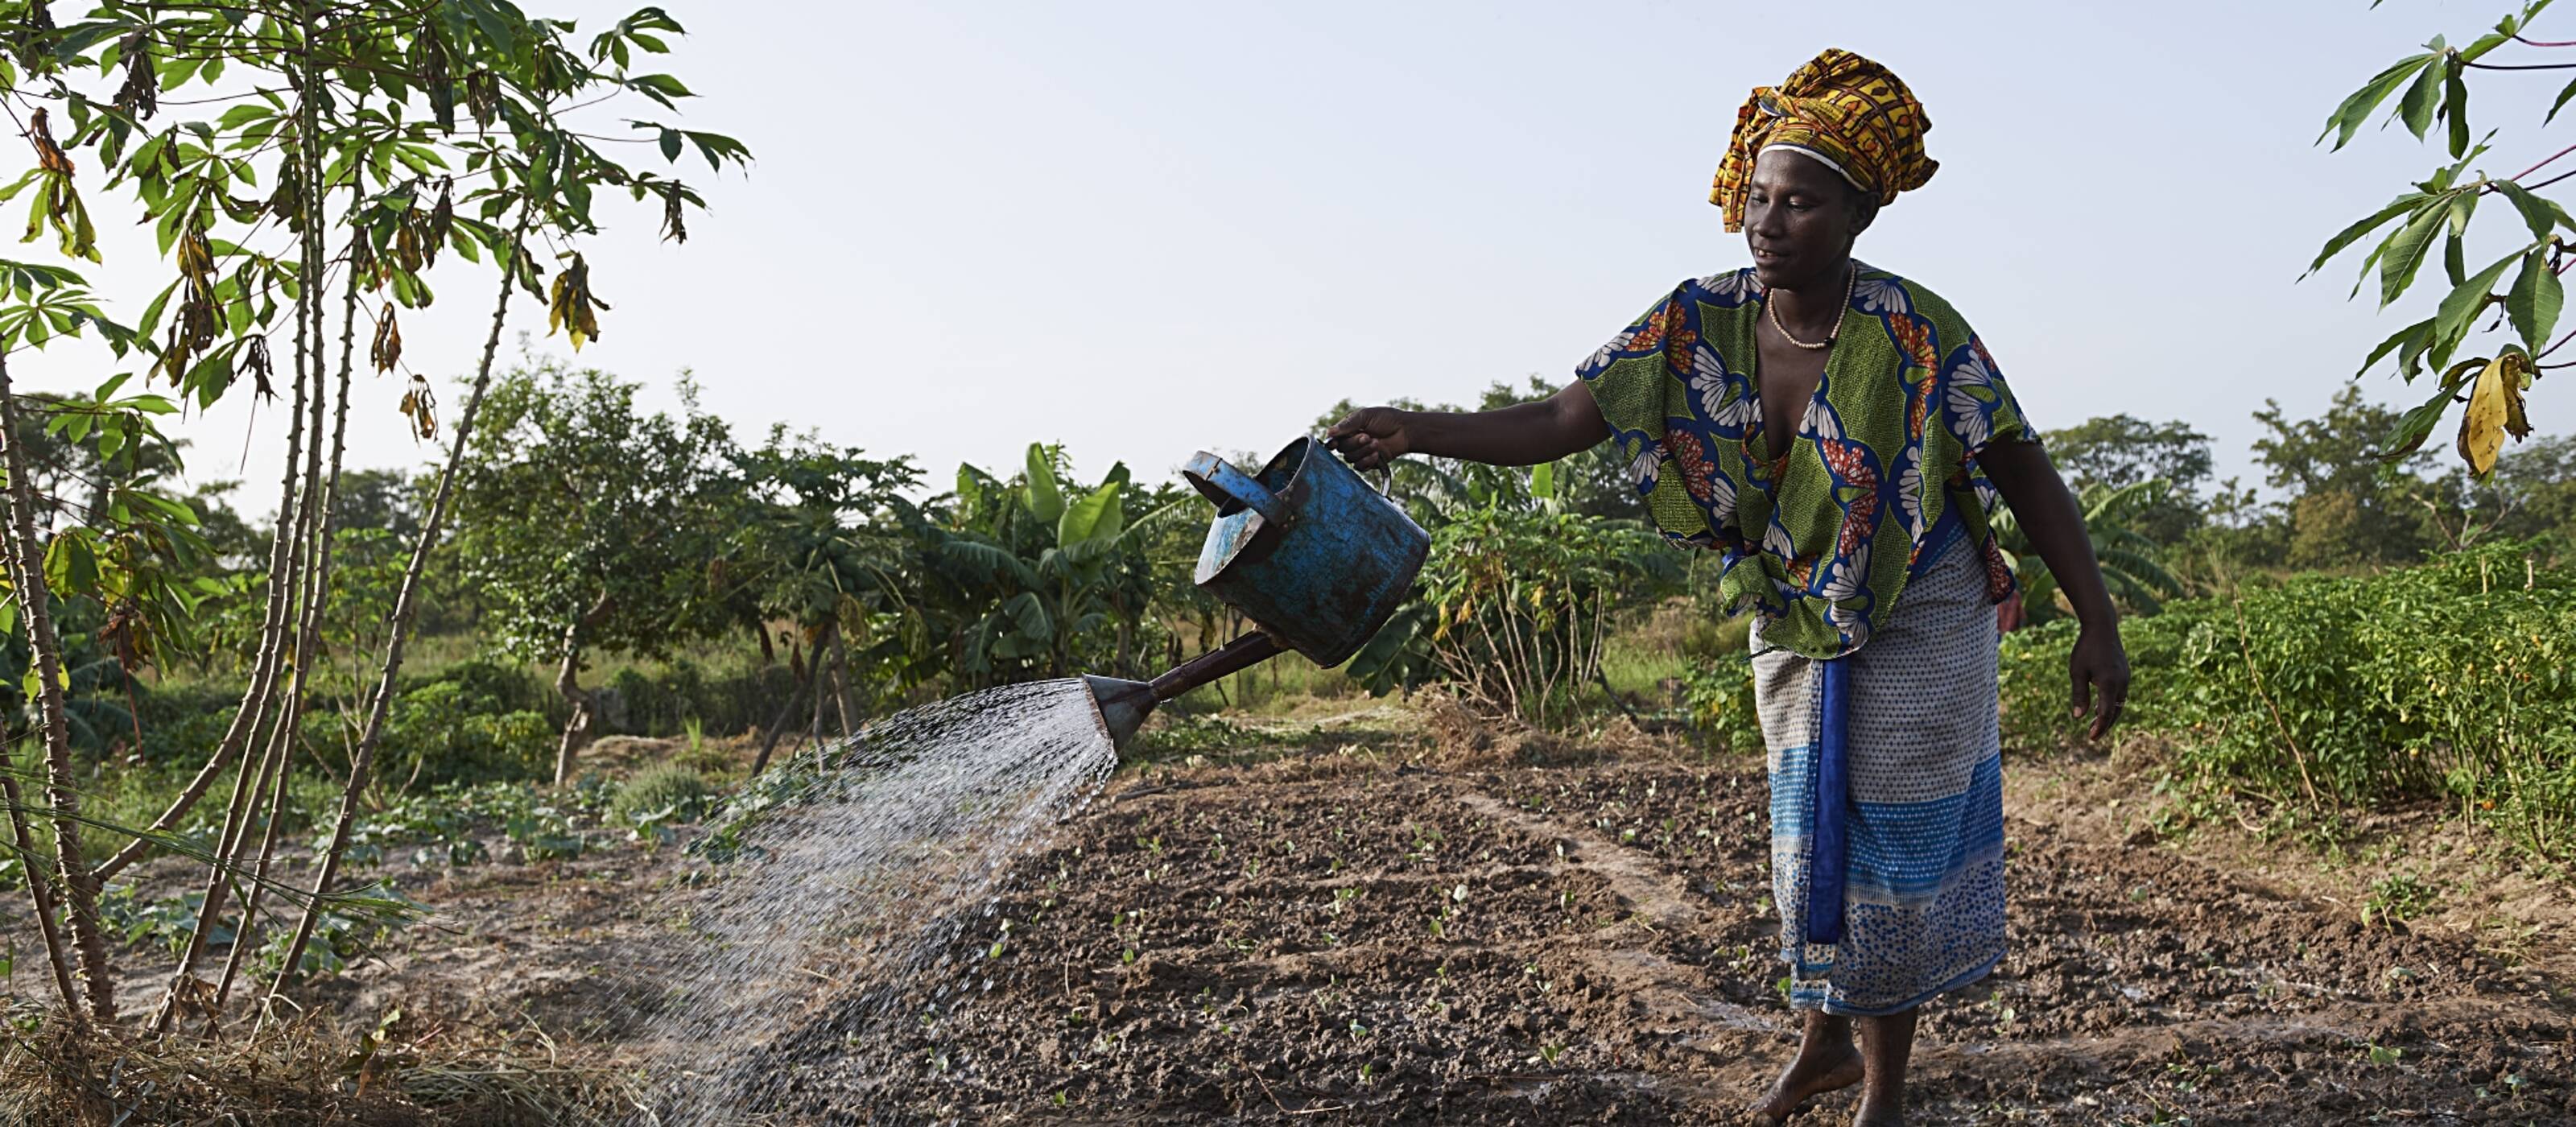 A woman irrigates her vegetable garden with a watering can in Yanfolila, Mali 